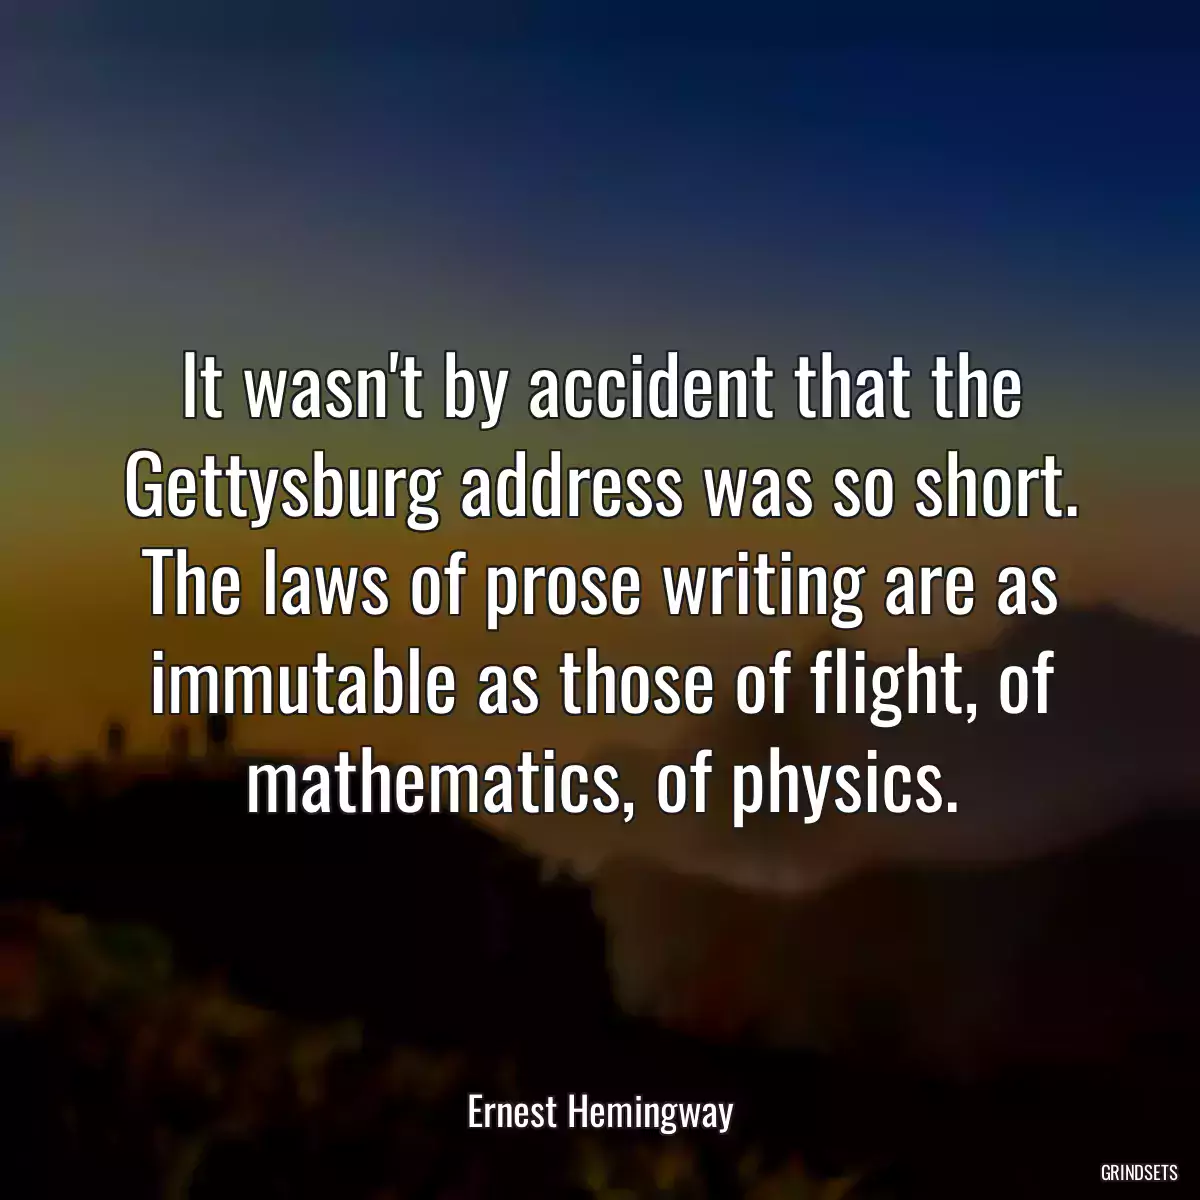 It wasn\'t by accident that the Gettysburg address was so short. The laws of prose writing are as immutable as those of flight, of mathematics, of physics.